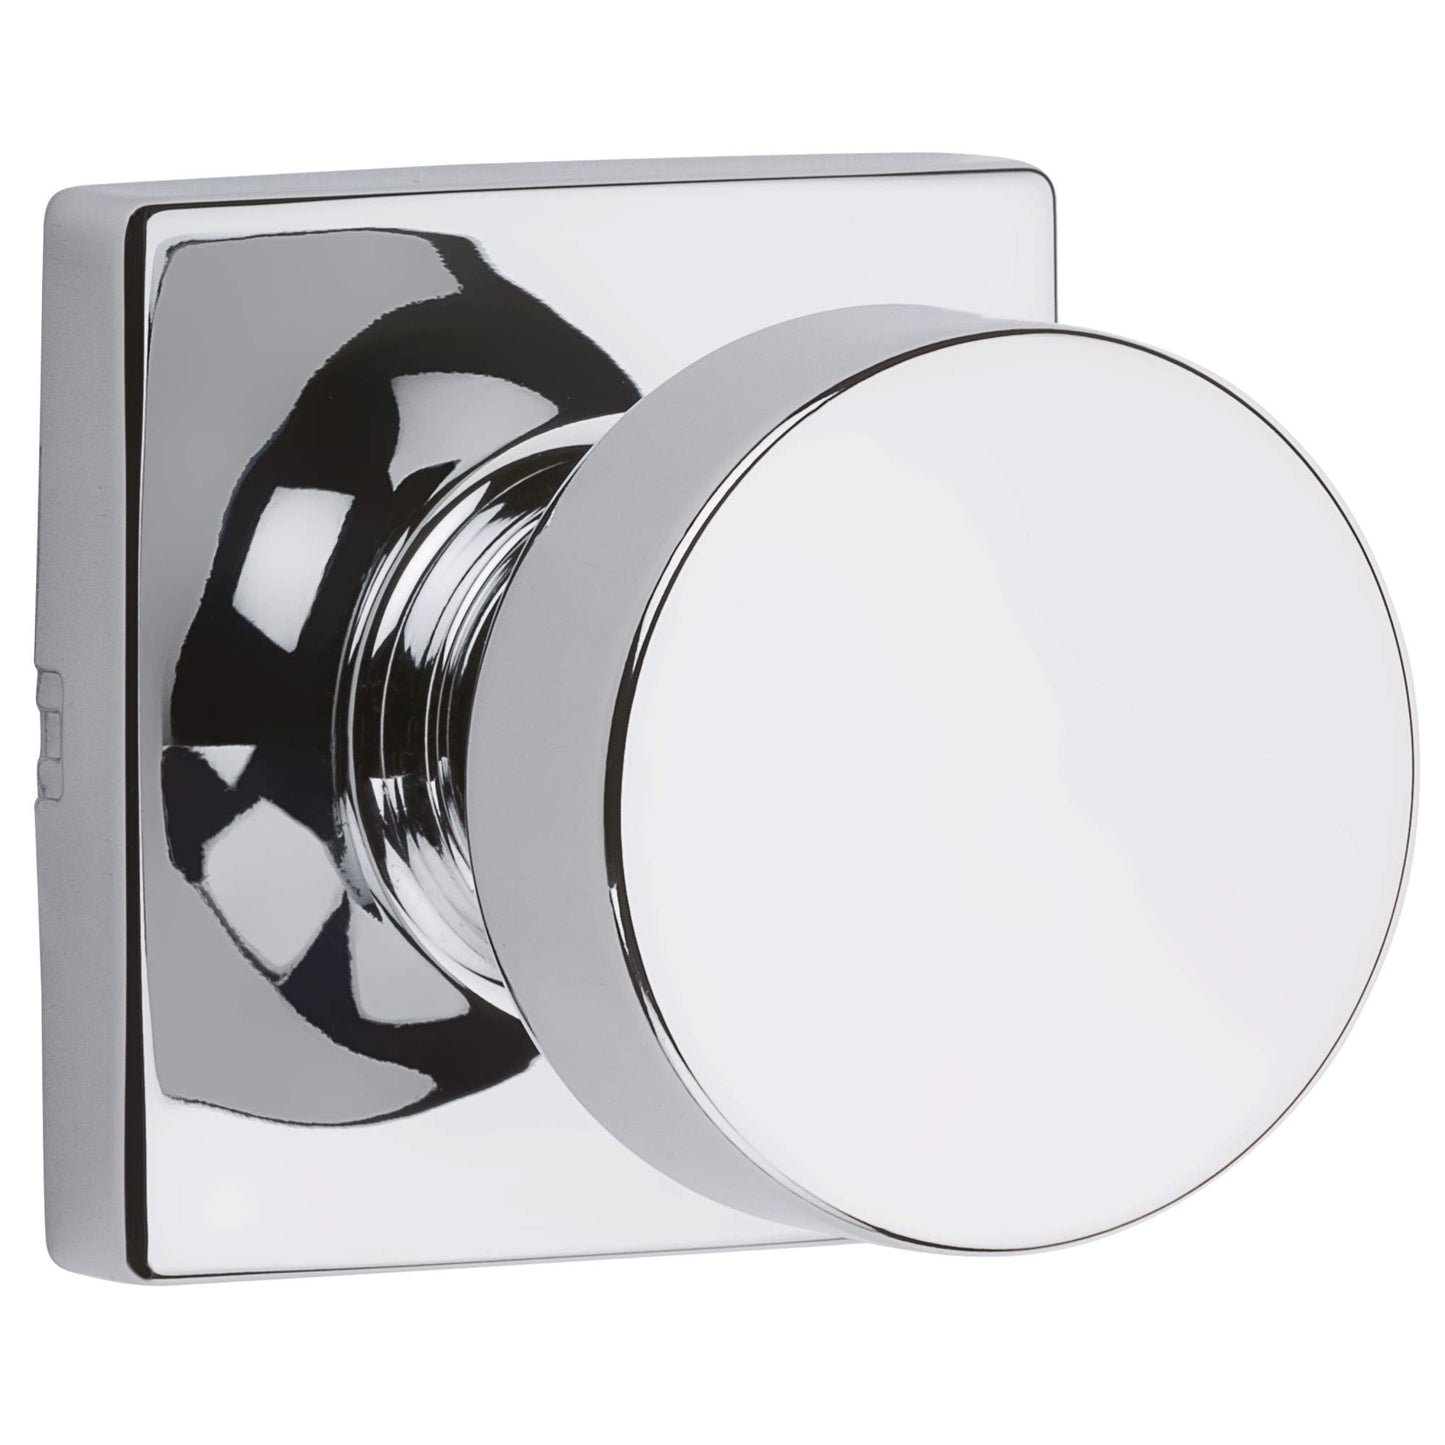 Kwikset 720PSKSQT-26 Pismo Knob with Square Rose Passage Lock with 6AL Latch and RCS Strike Bright Chrome Finish - Like New